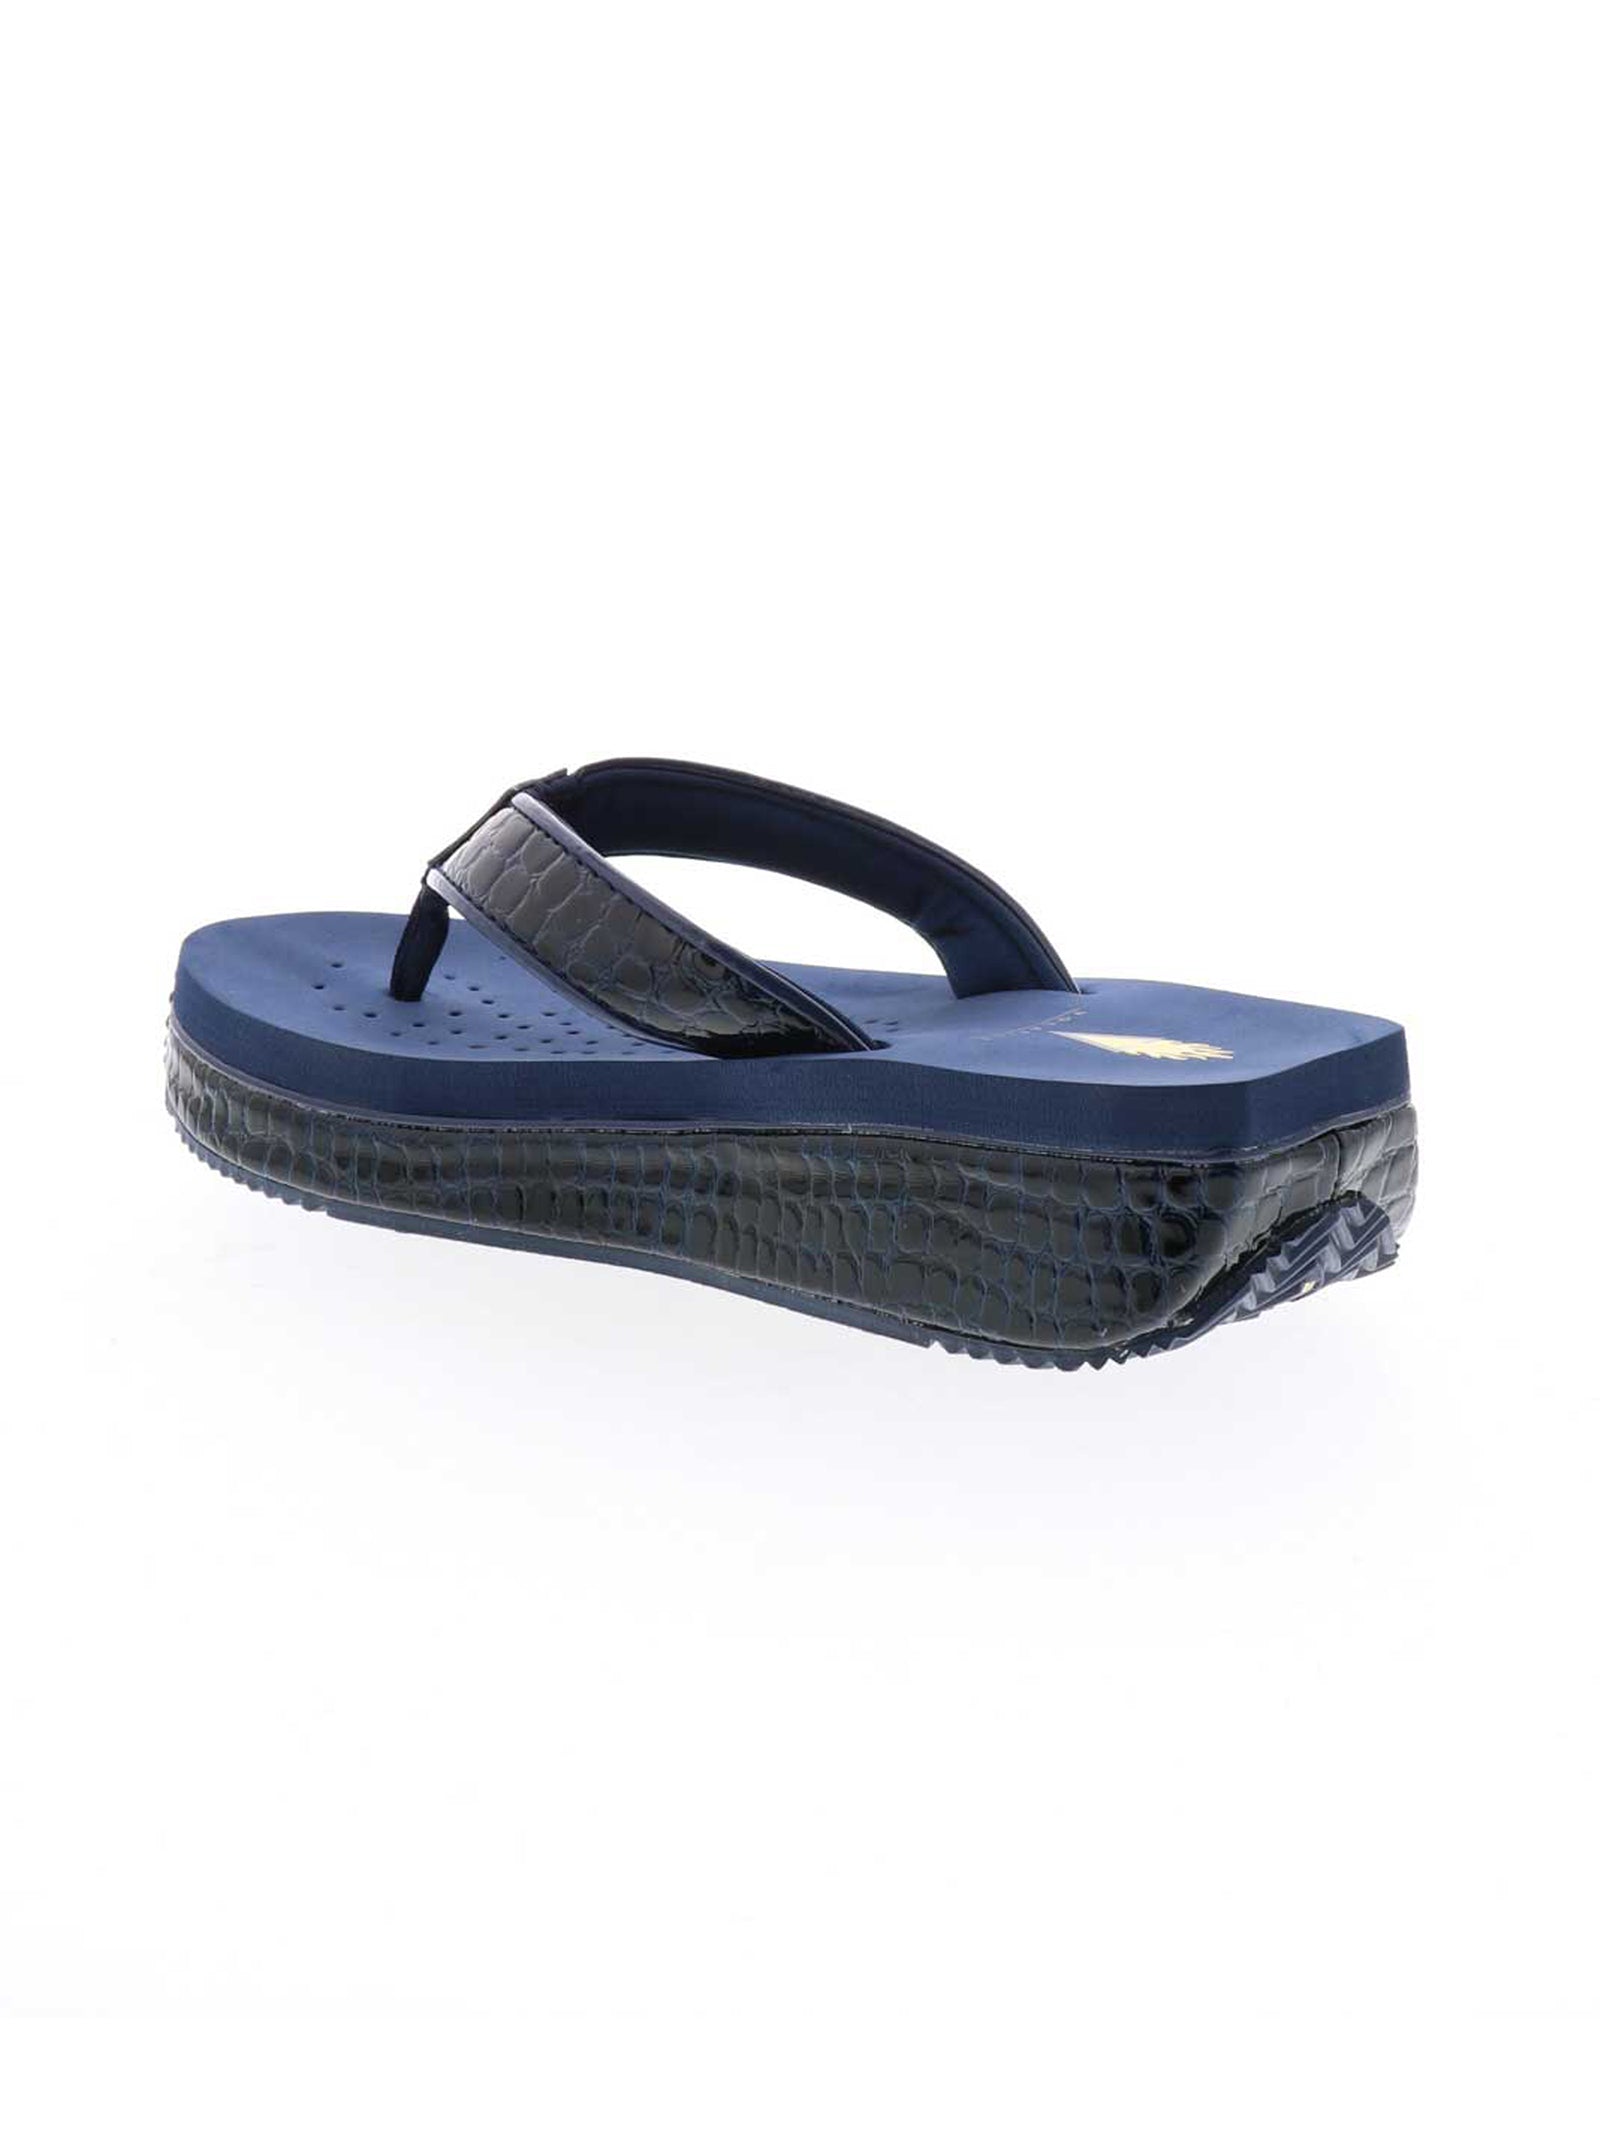 Why Podiatrists Love the Groove Sandals - Ascent Footwear